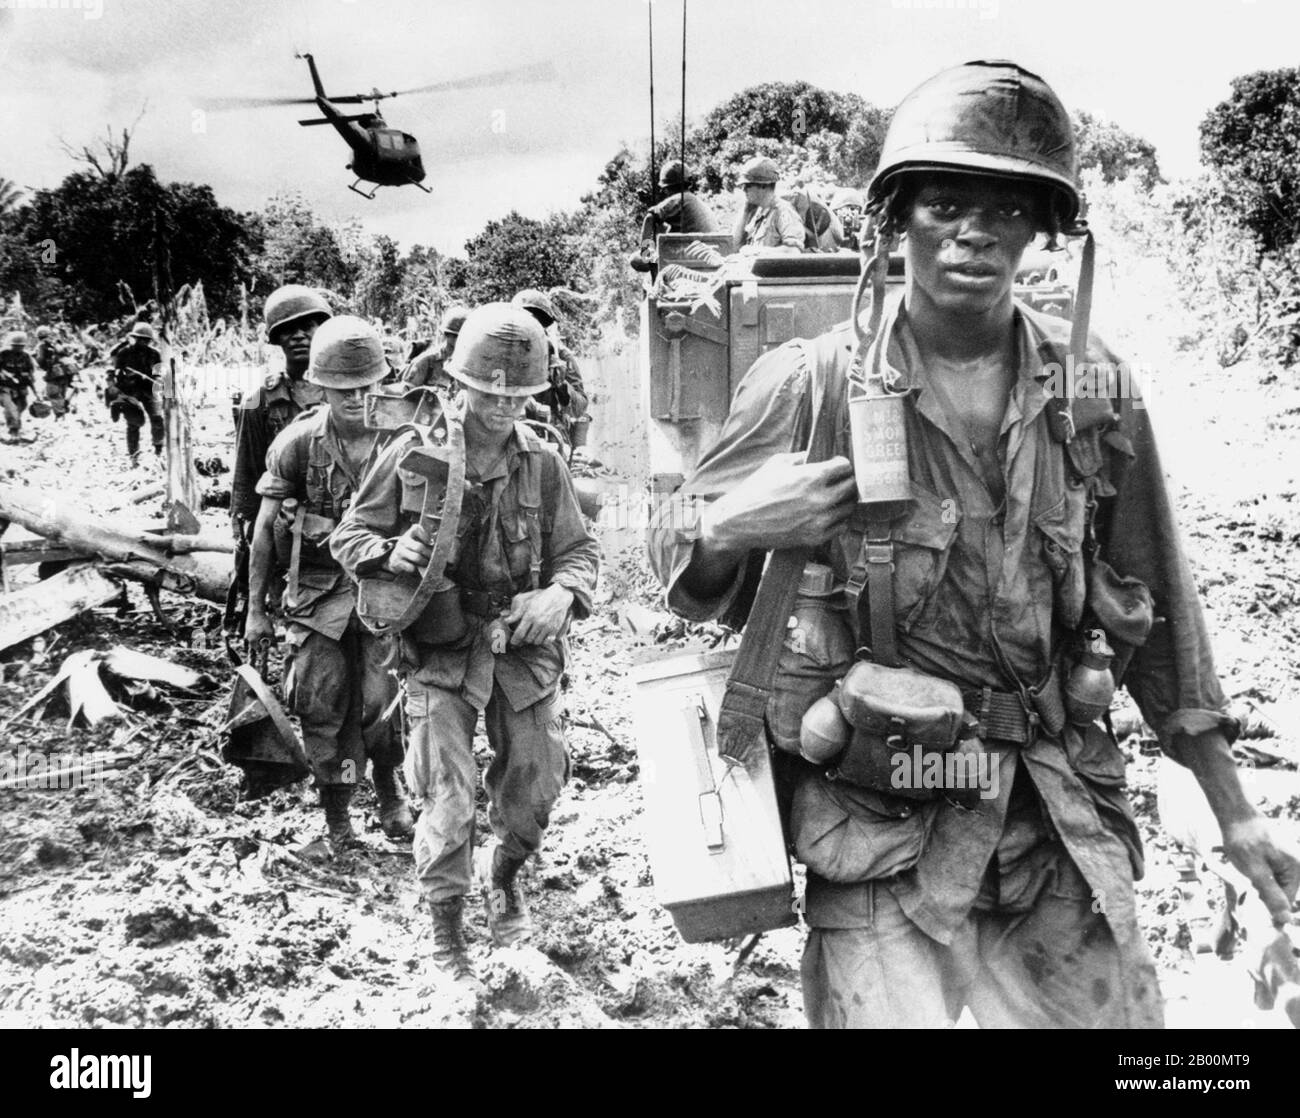 Vietnam: US soldiers on a search-and-destroy patrol in Phuoc Tuy province, South Vietnam, June 1966.  Search and Destroy, Seek and Destroy, or even simply S&D, refers to a military strategy that became a notorious component of the Vietnam War. The idea was to insert ground forces into hostile territory, search out the enemy, destroy them, and withdraw immediately afterward. The strategy was the result of a new technology, the helicopter, which resulted in a new form of warfare, the fielding of air cavalry, and was thought to be ideally suited to counter-guerrilla jungle warfare. Stock Photo